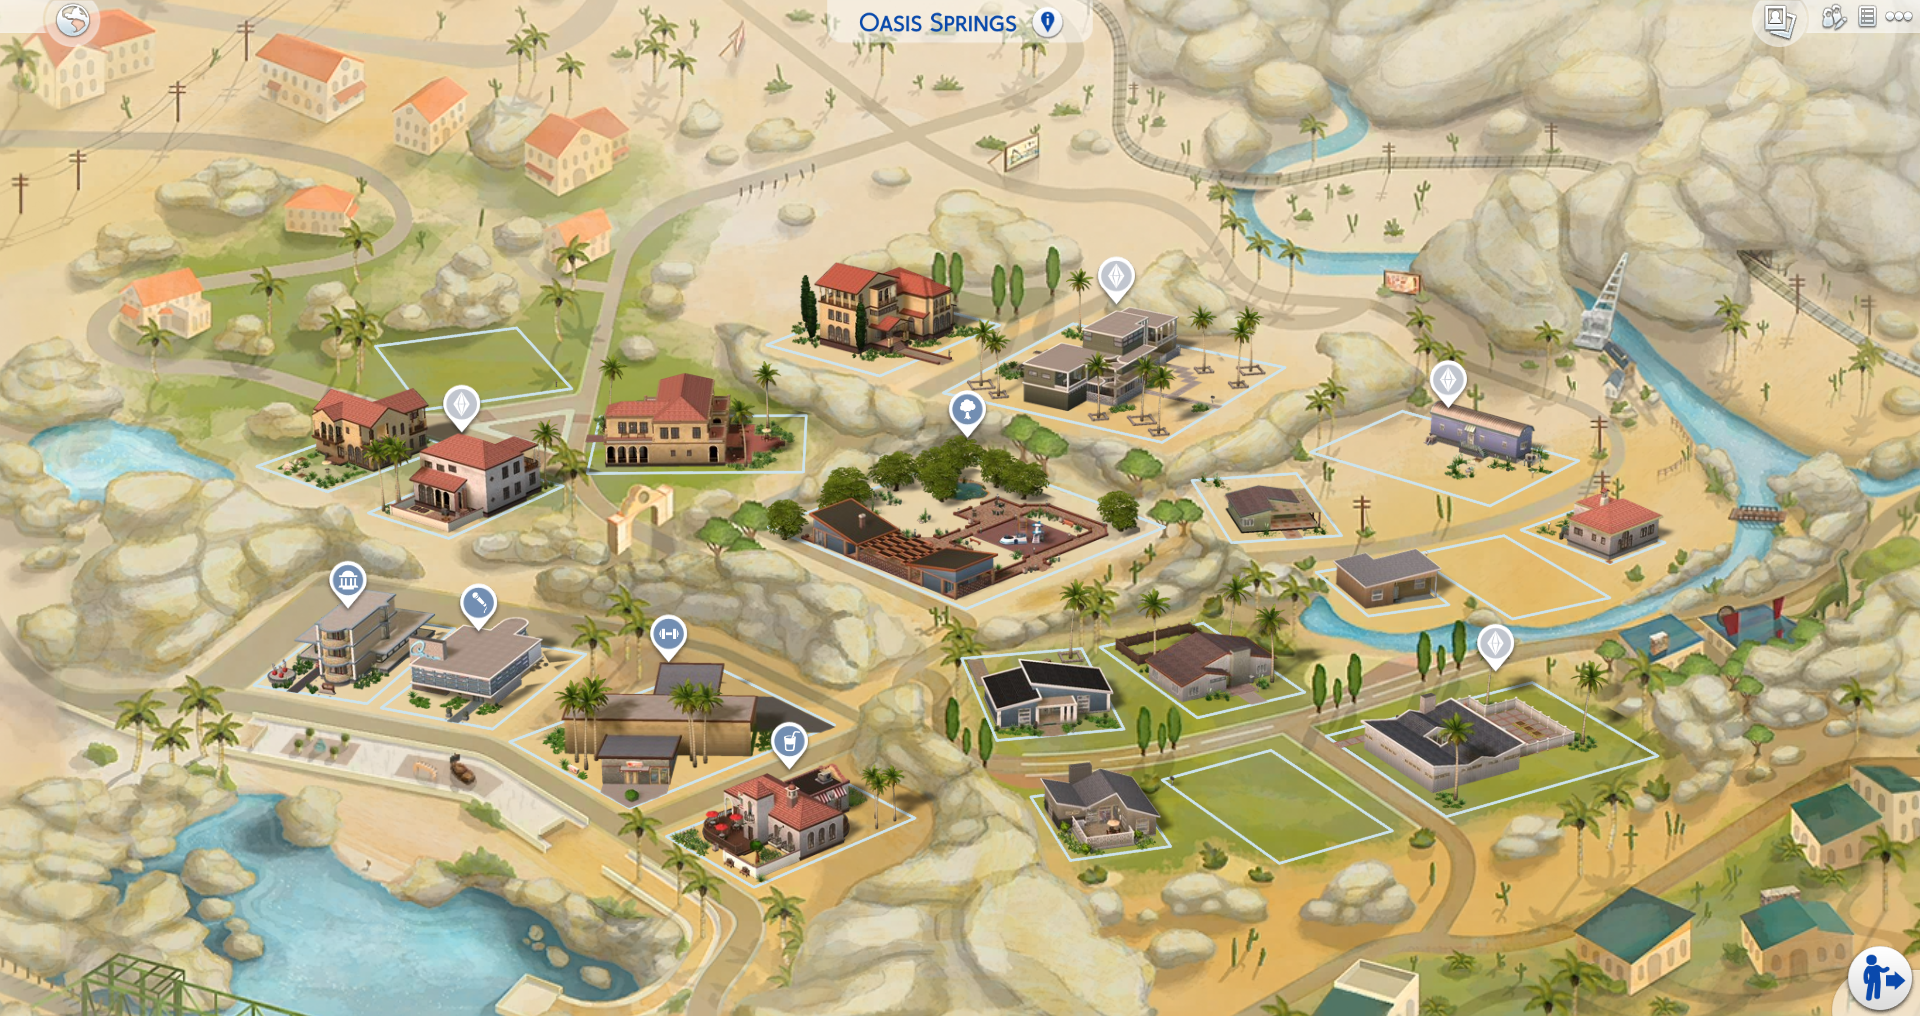 Sims 4 Map Replacement Real Map Of Earth